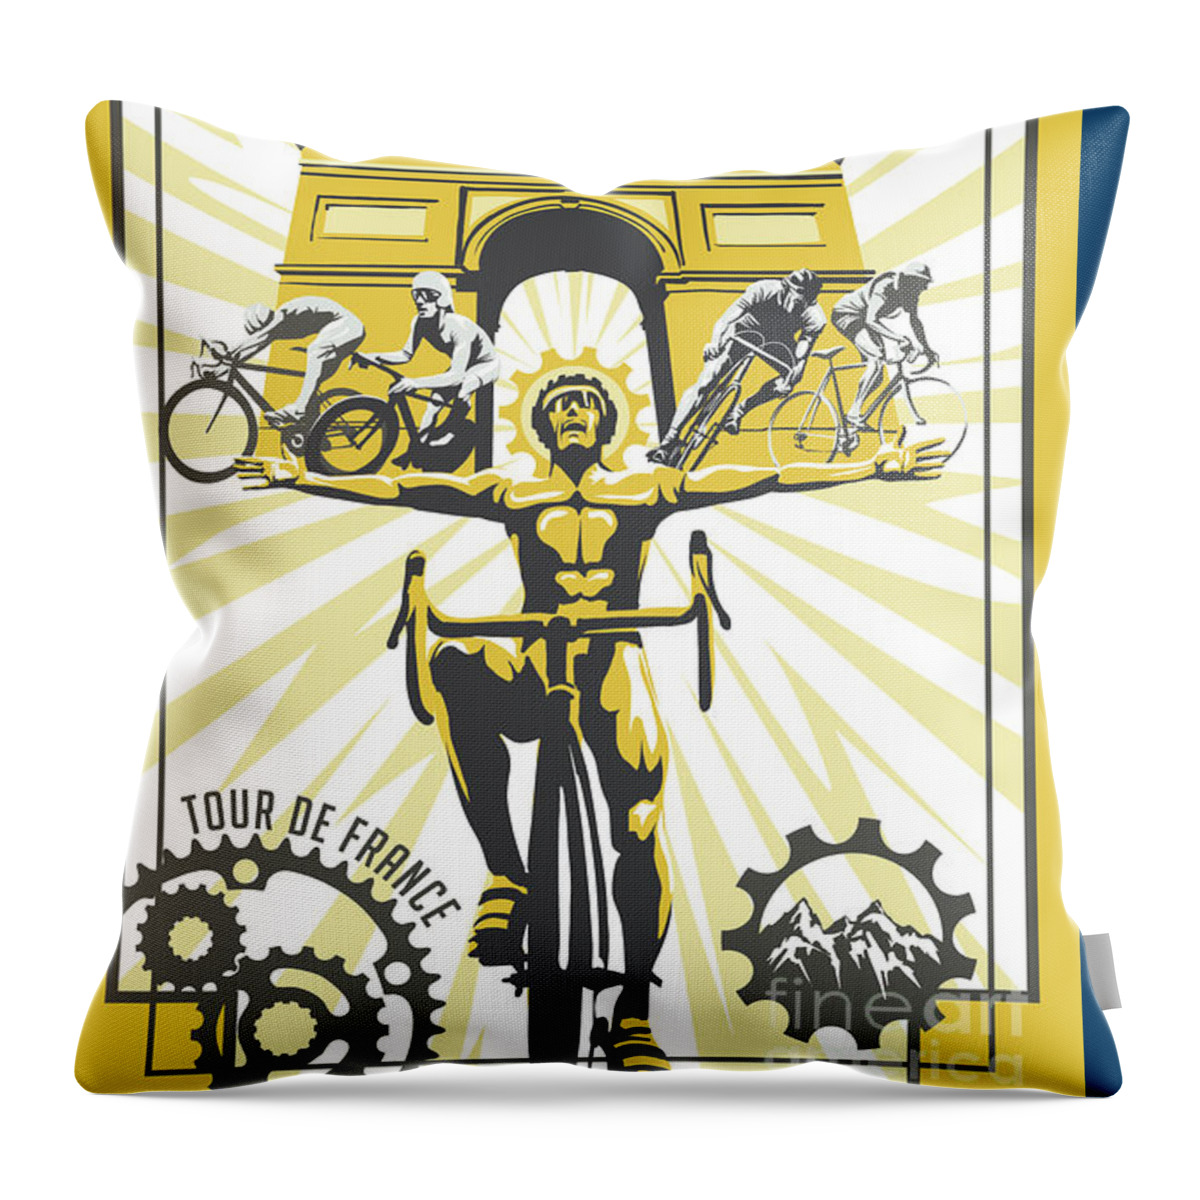 Scuba Diving Throw Pillow featuring the painting Print by Sassan Filsoof